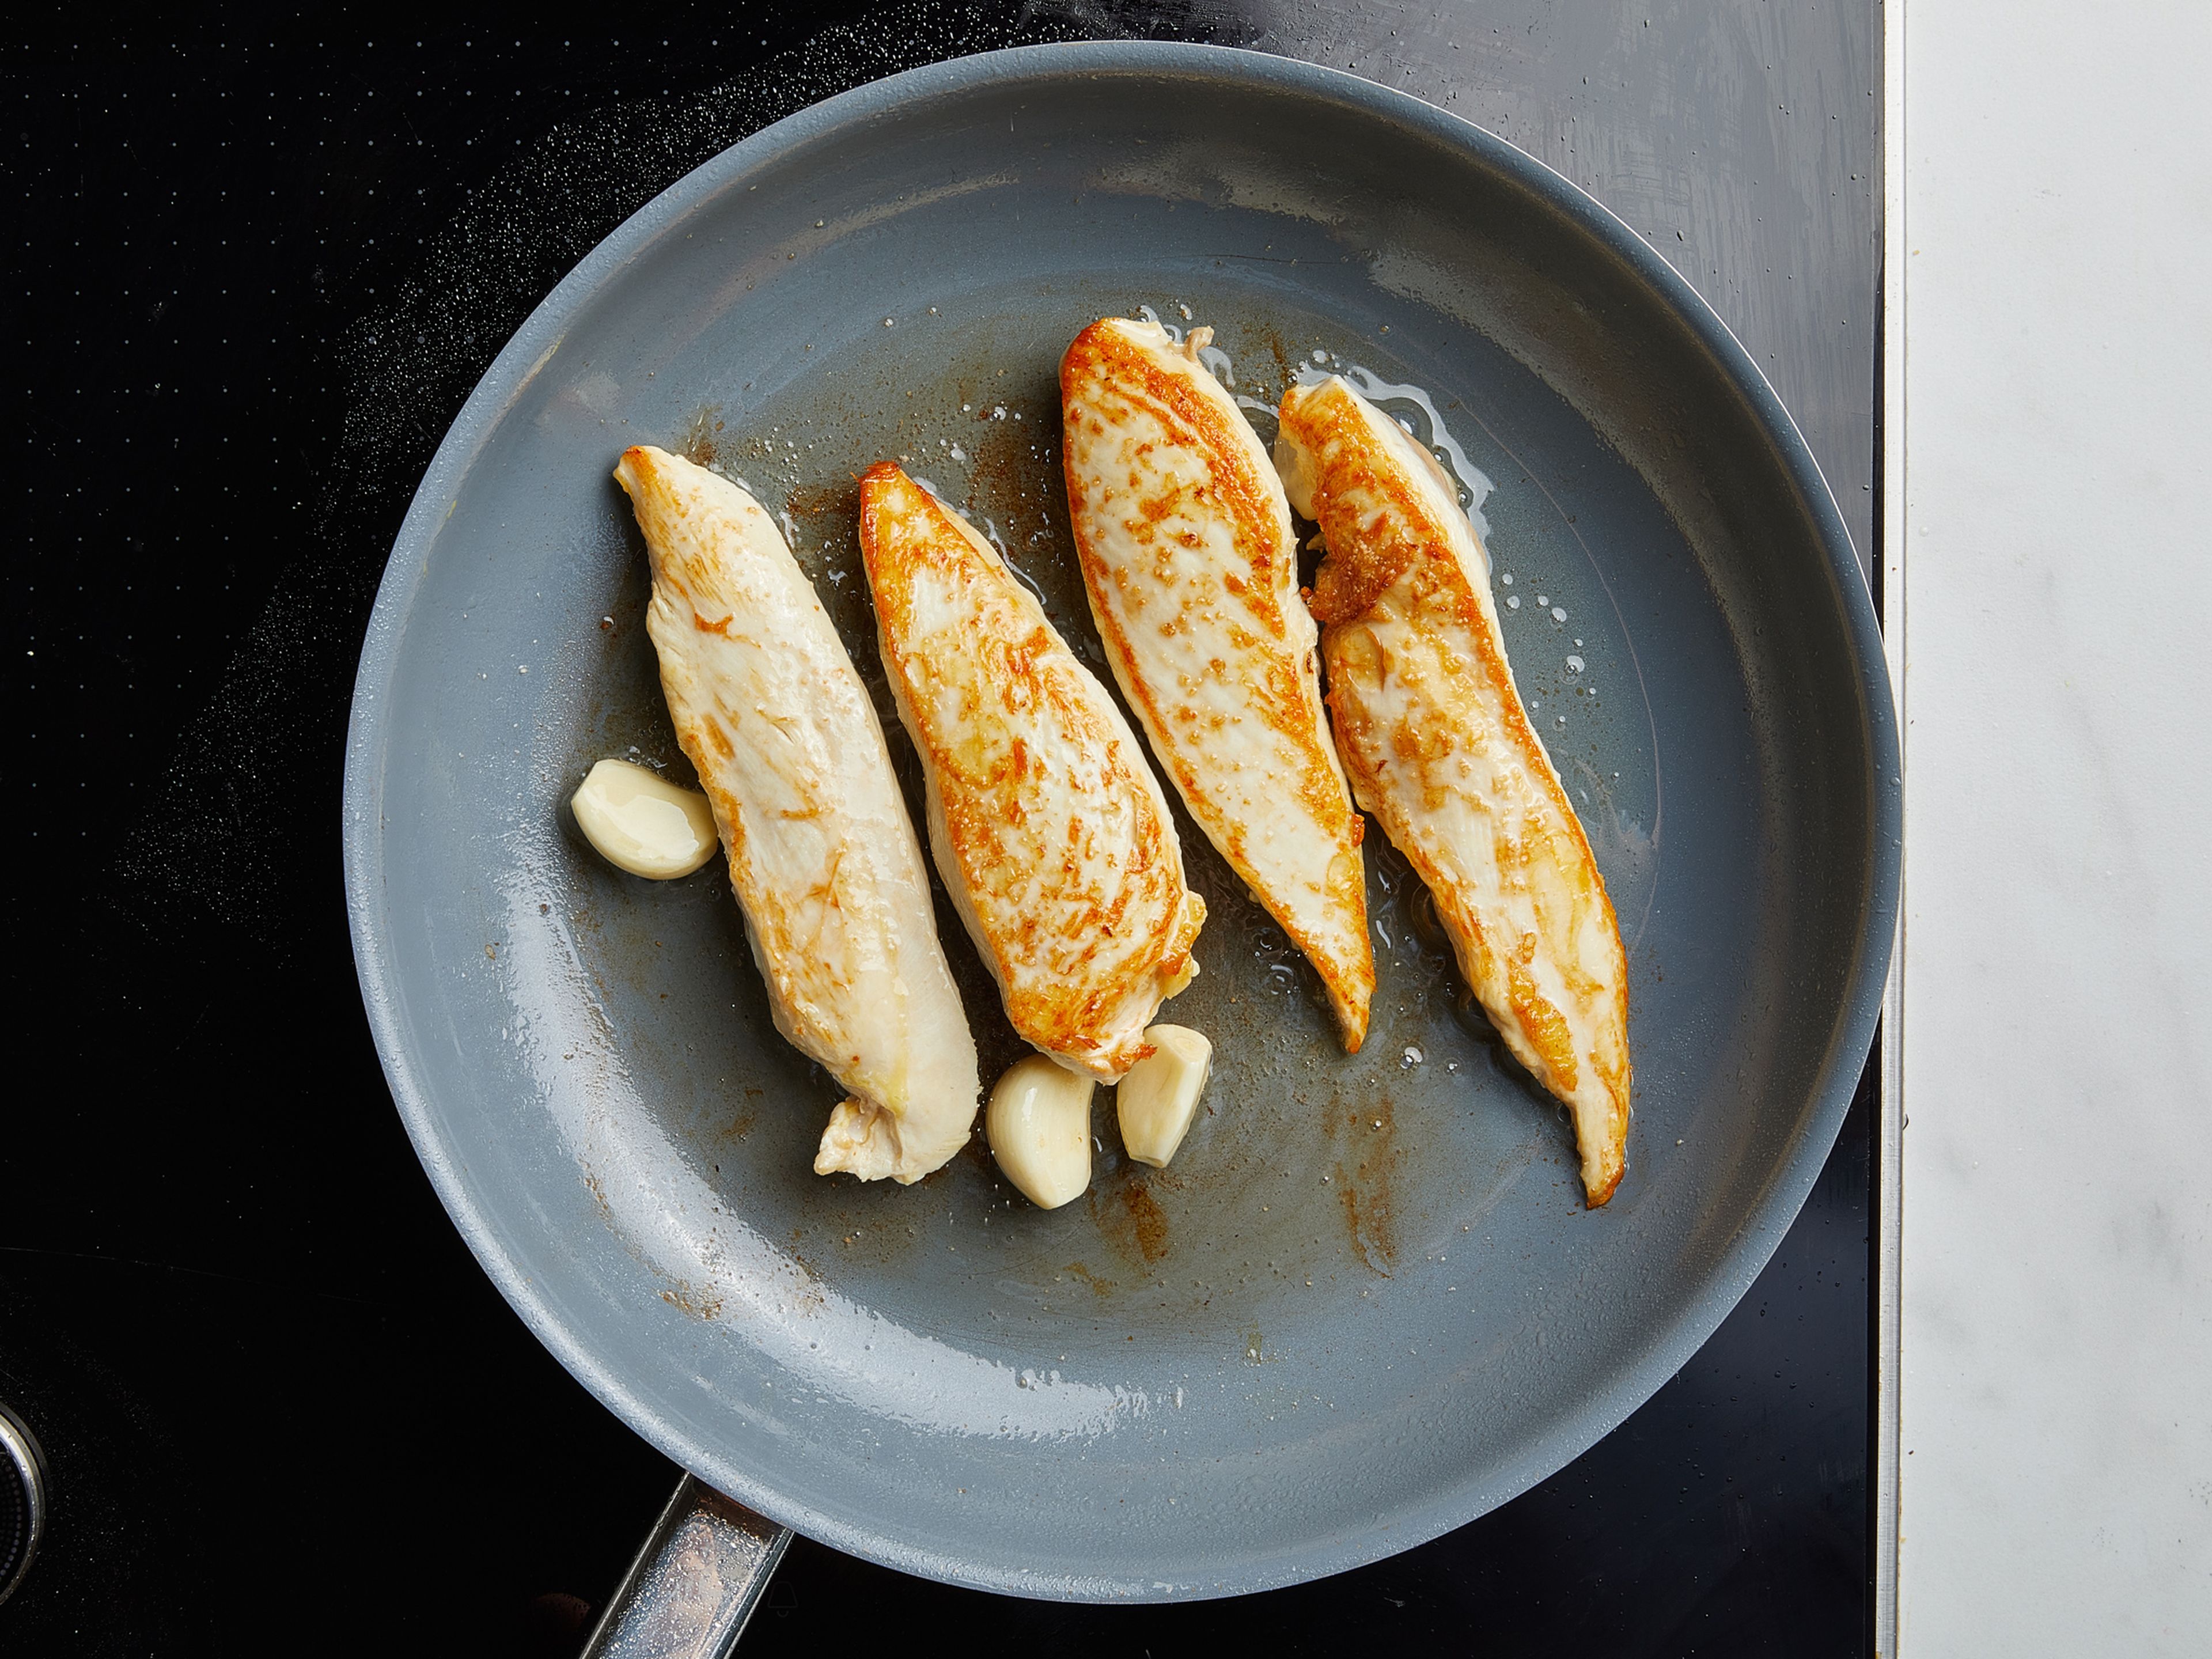 Butterfly chicken breasts, season both sides with salt. Fry in a hot pan with olive oil for approx. 5 min. on all sides, or until the chicken is cooked through. Add garlic cloves and fry briefly. Remove chicken from pan and wrap in aluminum foil. Remove garlic clove, and set aside.